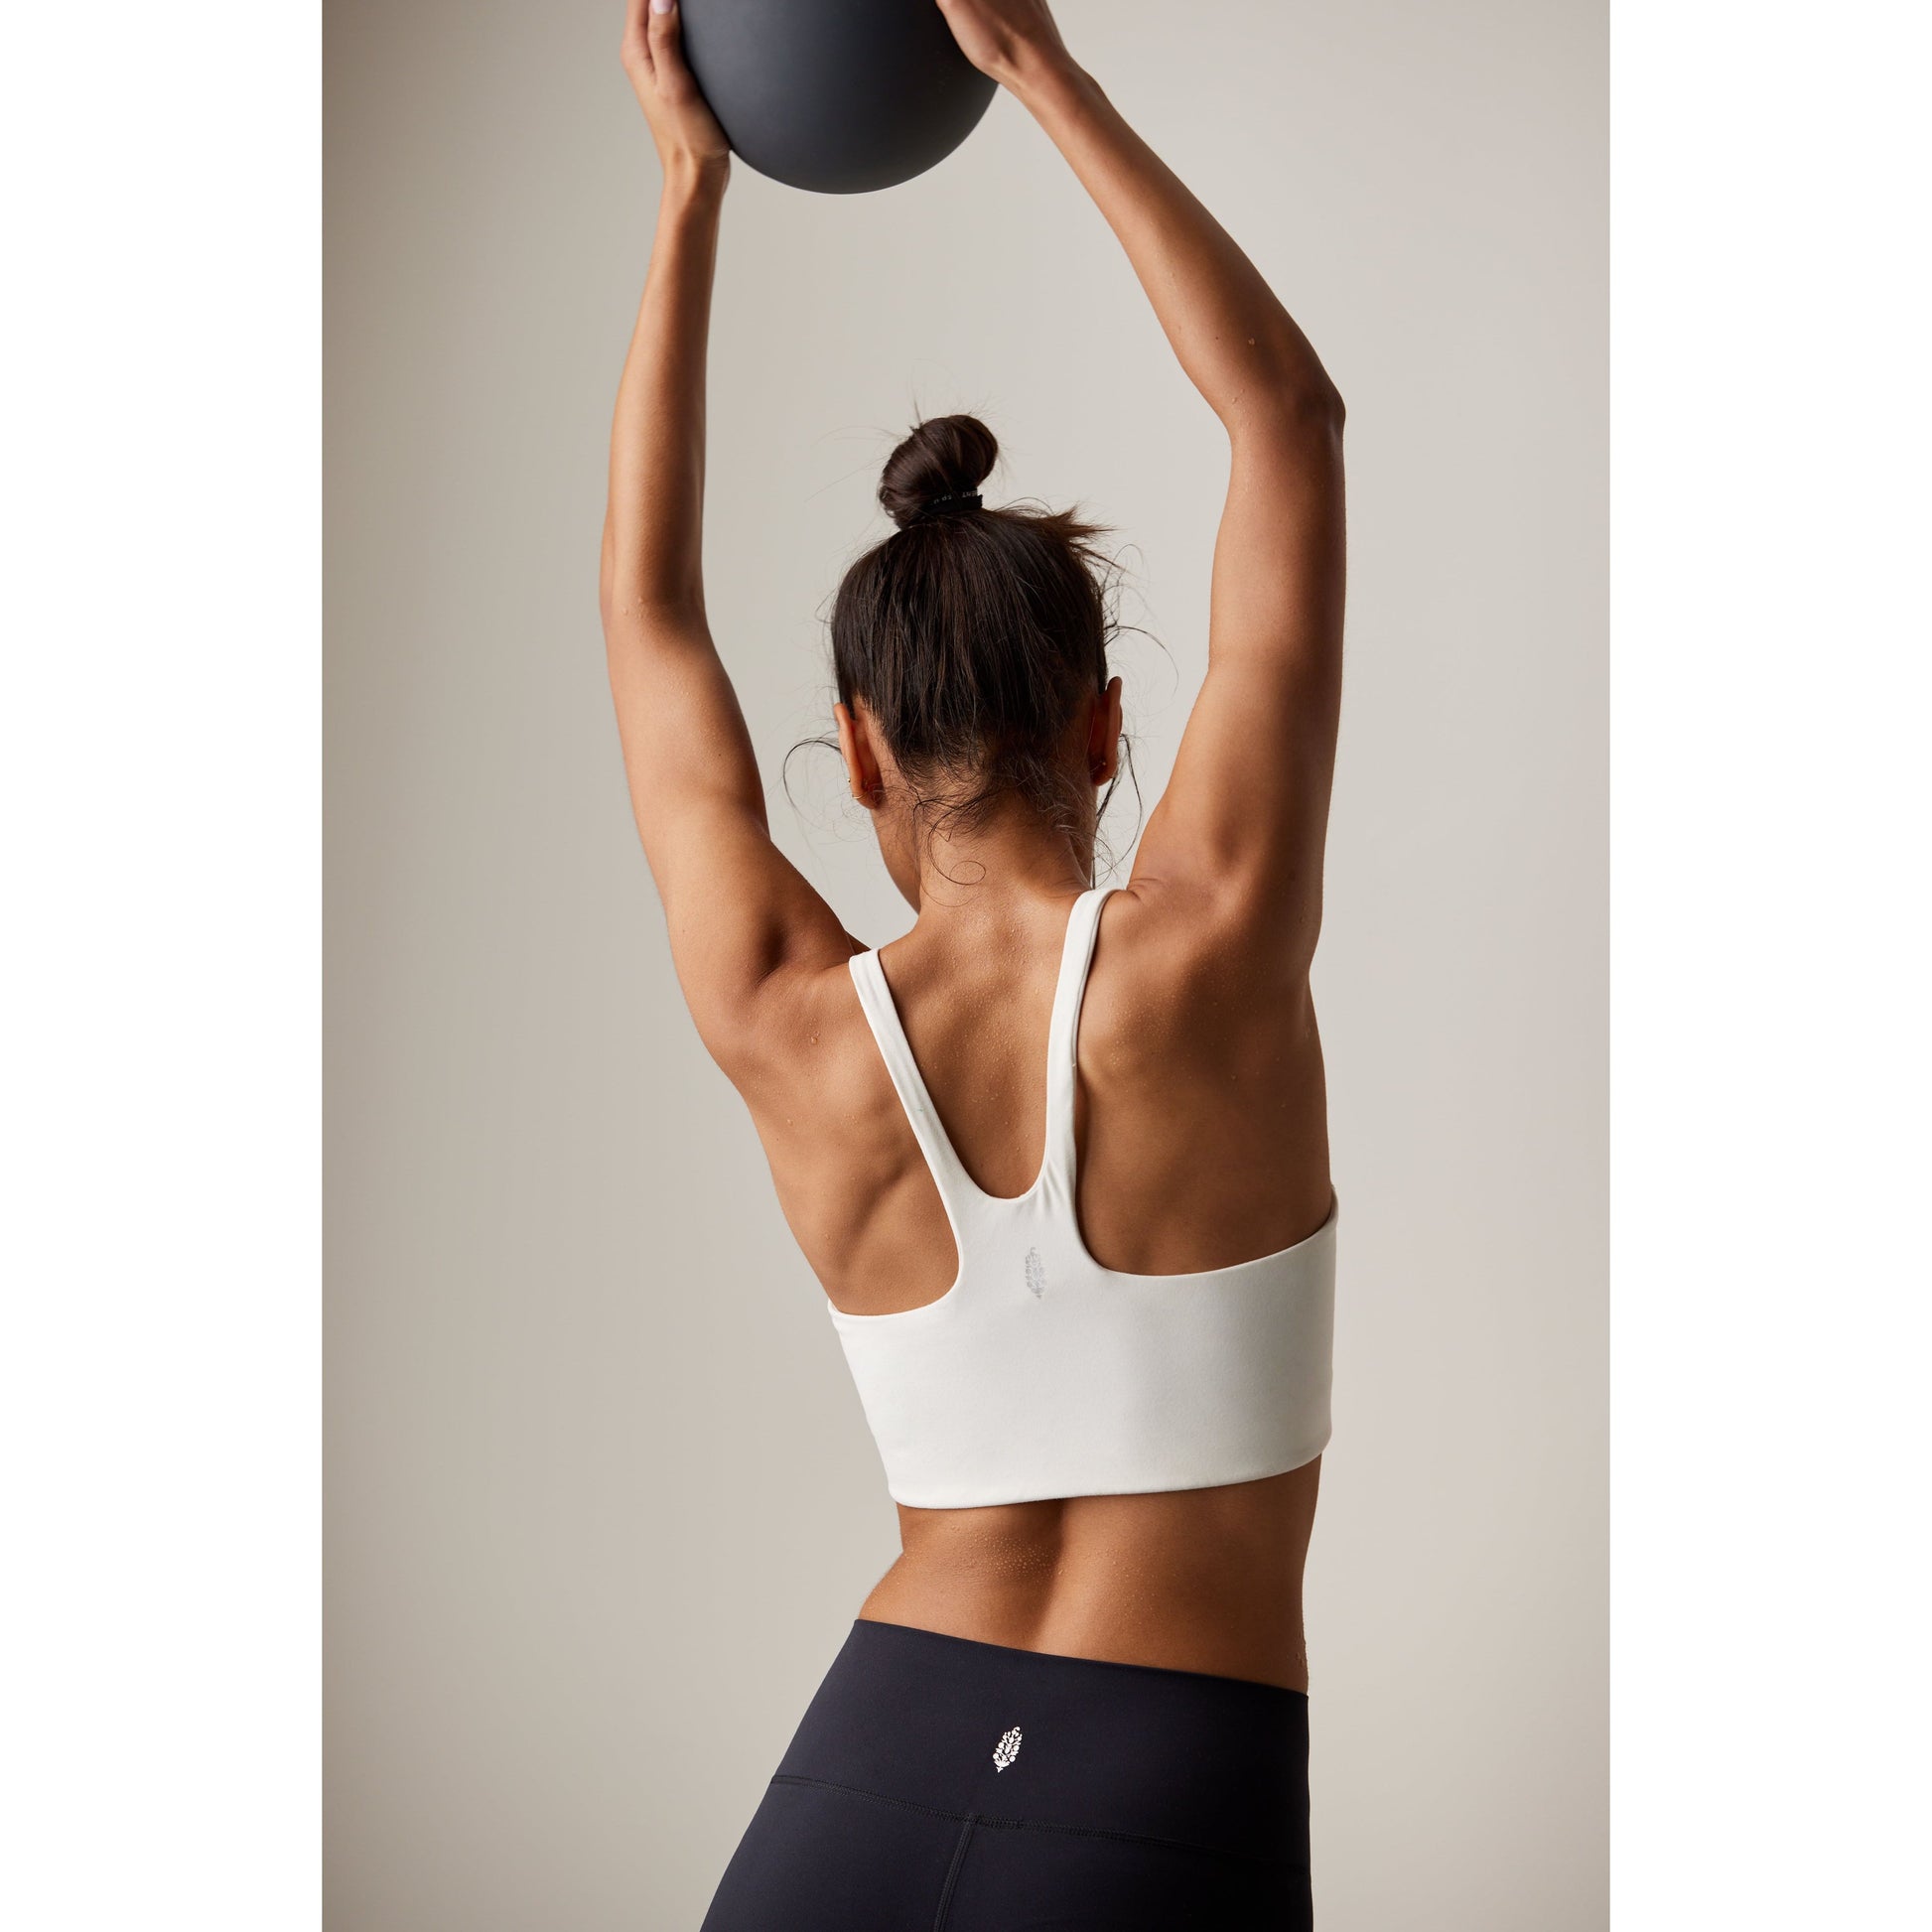 A woman in a Free People Movement Never Better SQ Neck Bra in White and black leggings, viewed from behind, lifting a medicine ball above her head against a neutral background.